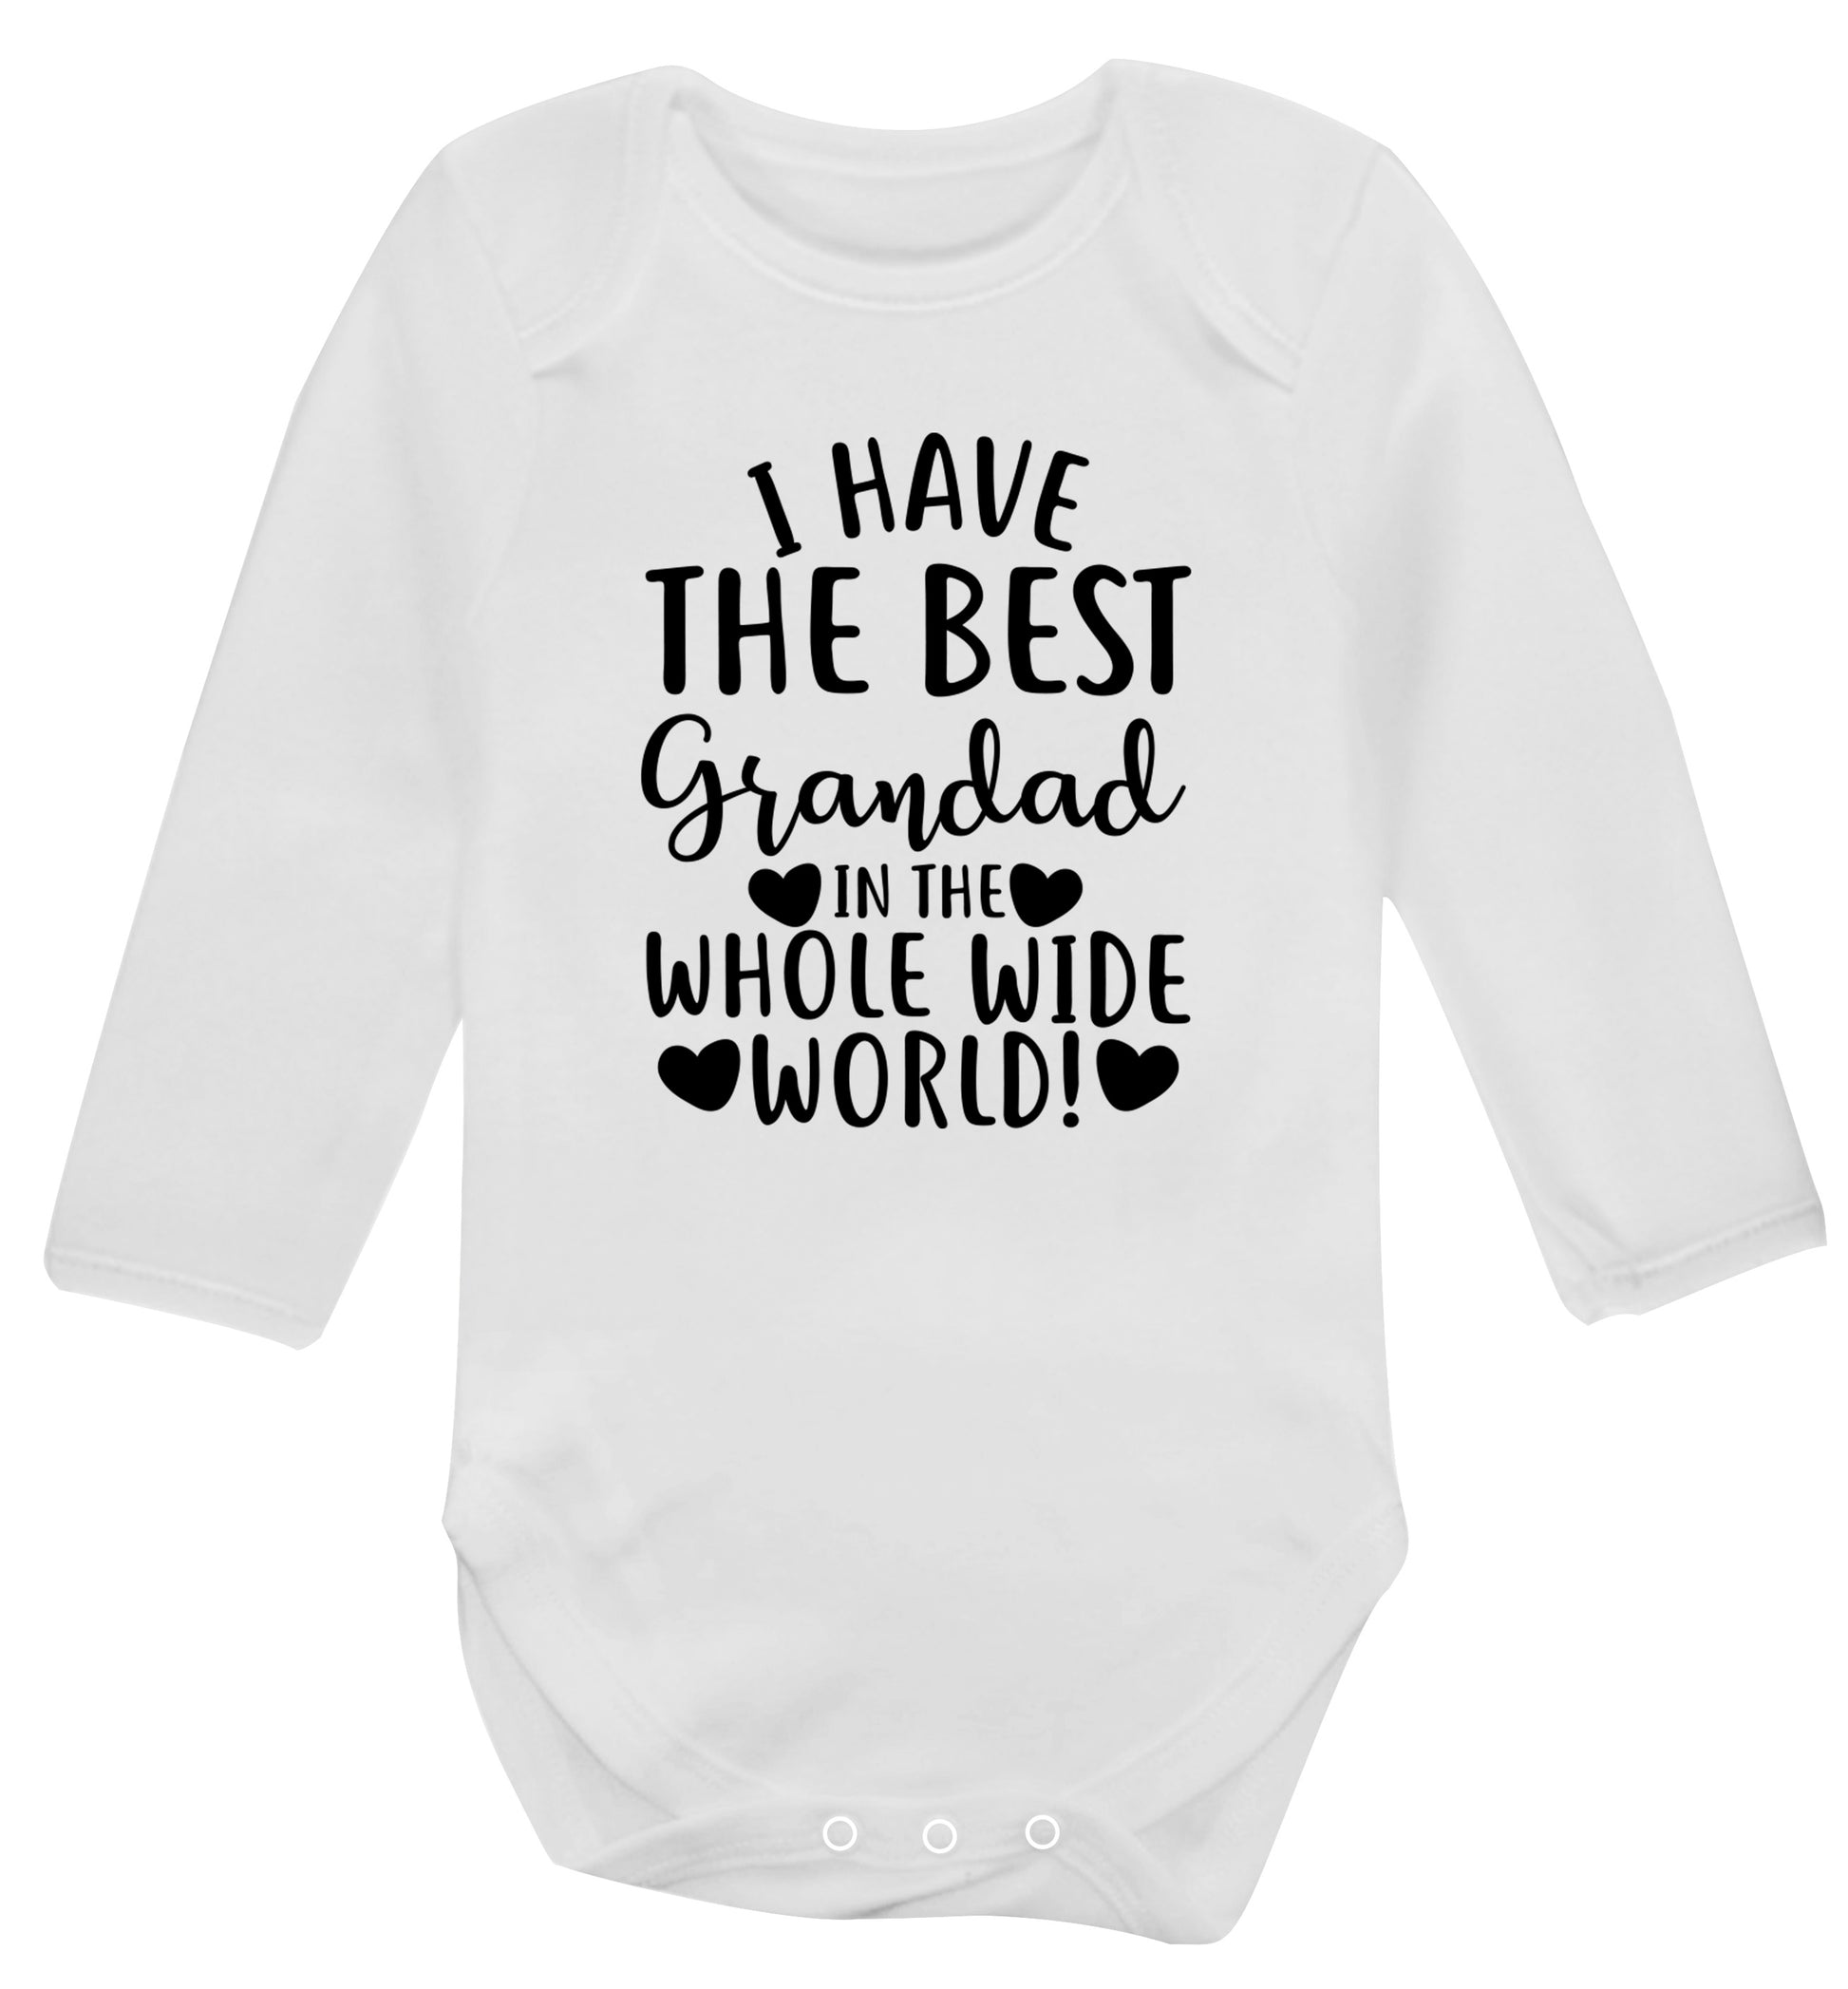 I have the best grandad in the whole wide world! Baby Vest long sleeved white 6-12 months